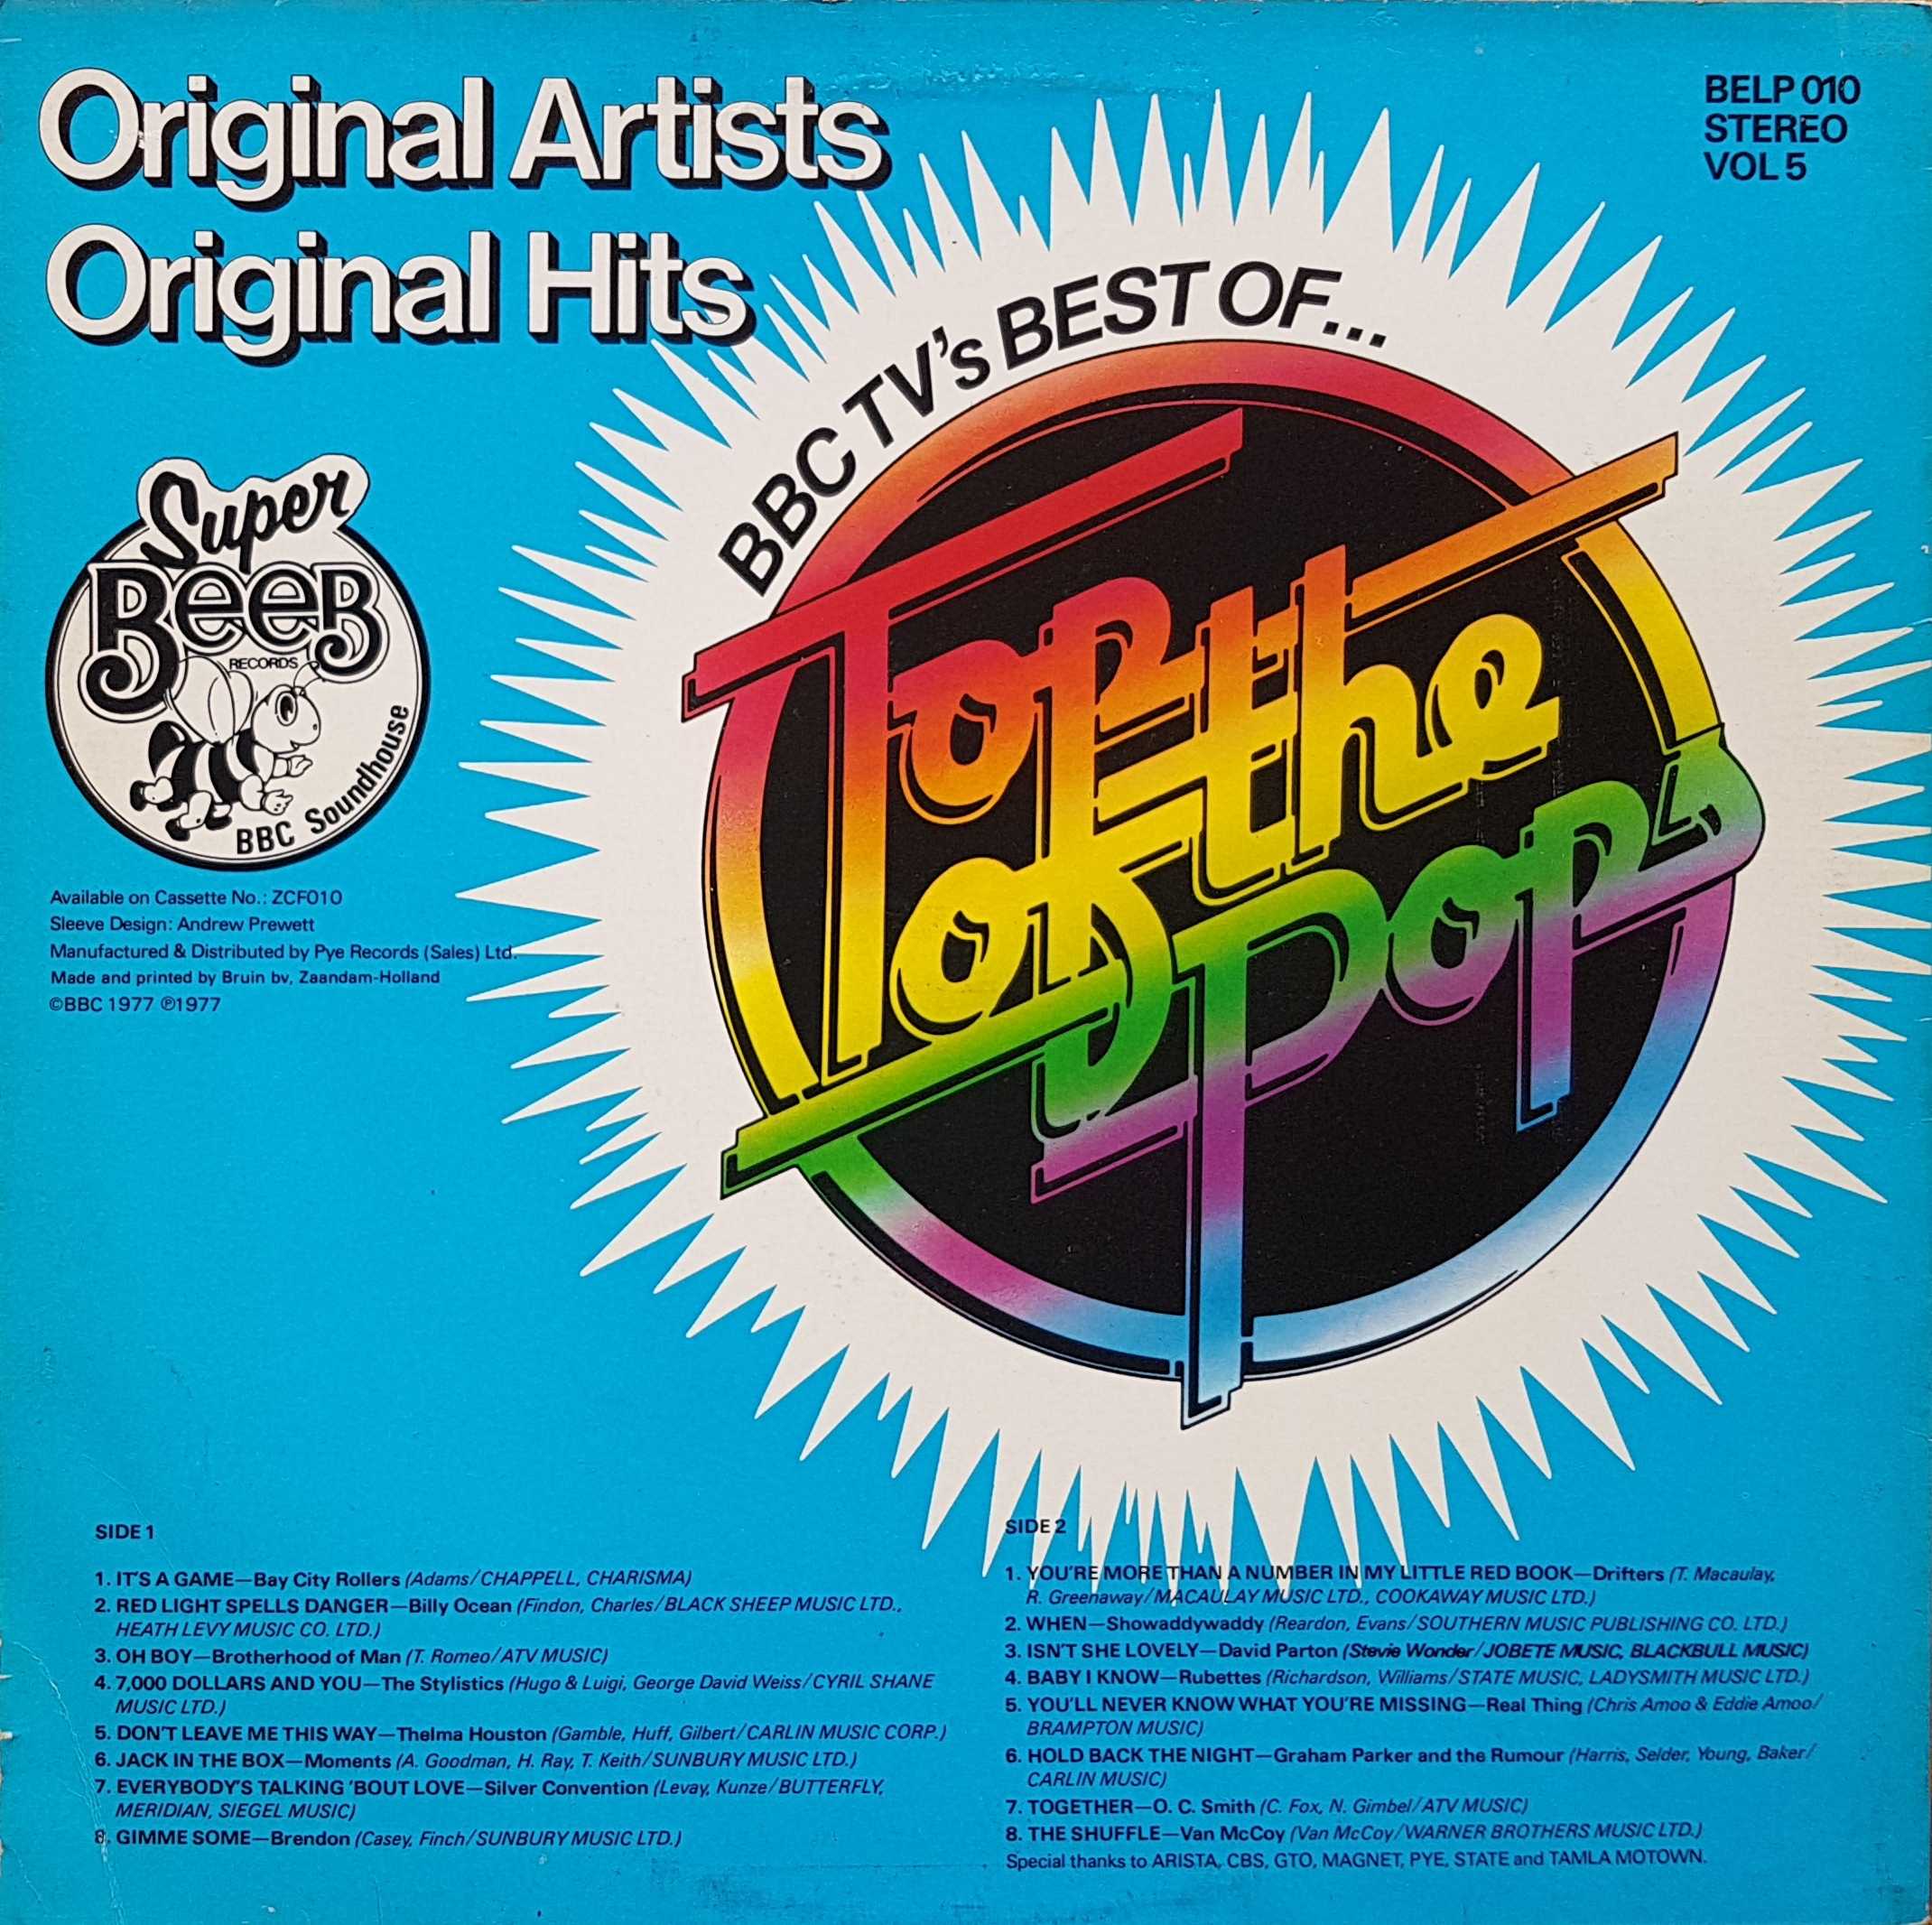 Picture of BELP 010 BBC TV's best of top of the pops - Volume 5 by artist Various from the BBC records and Tapes library